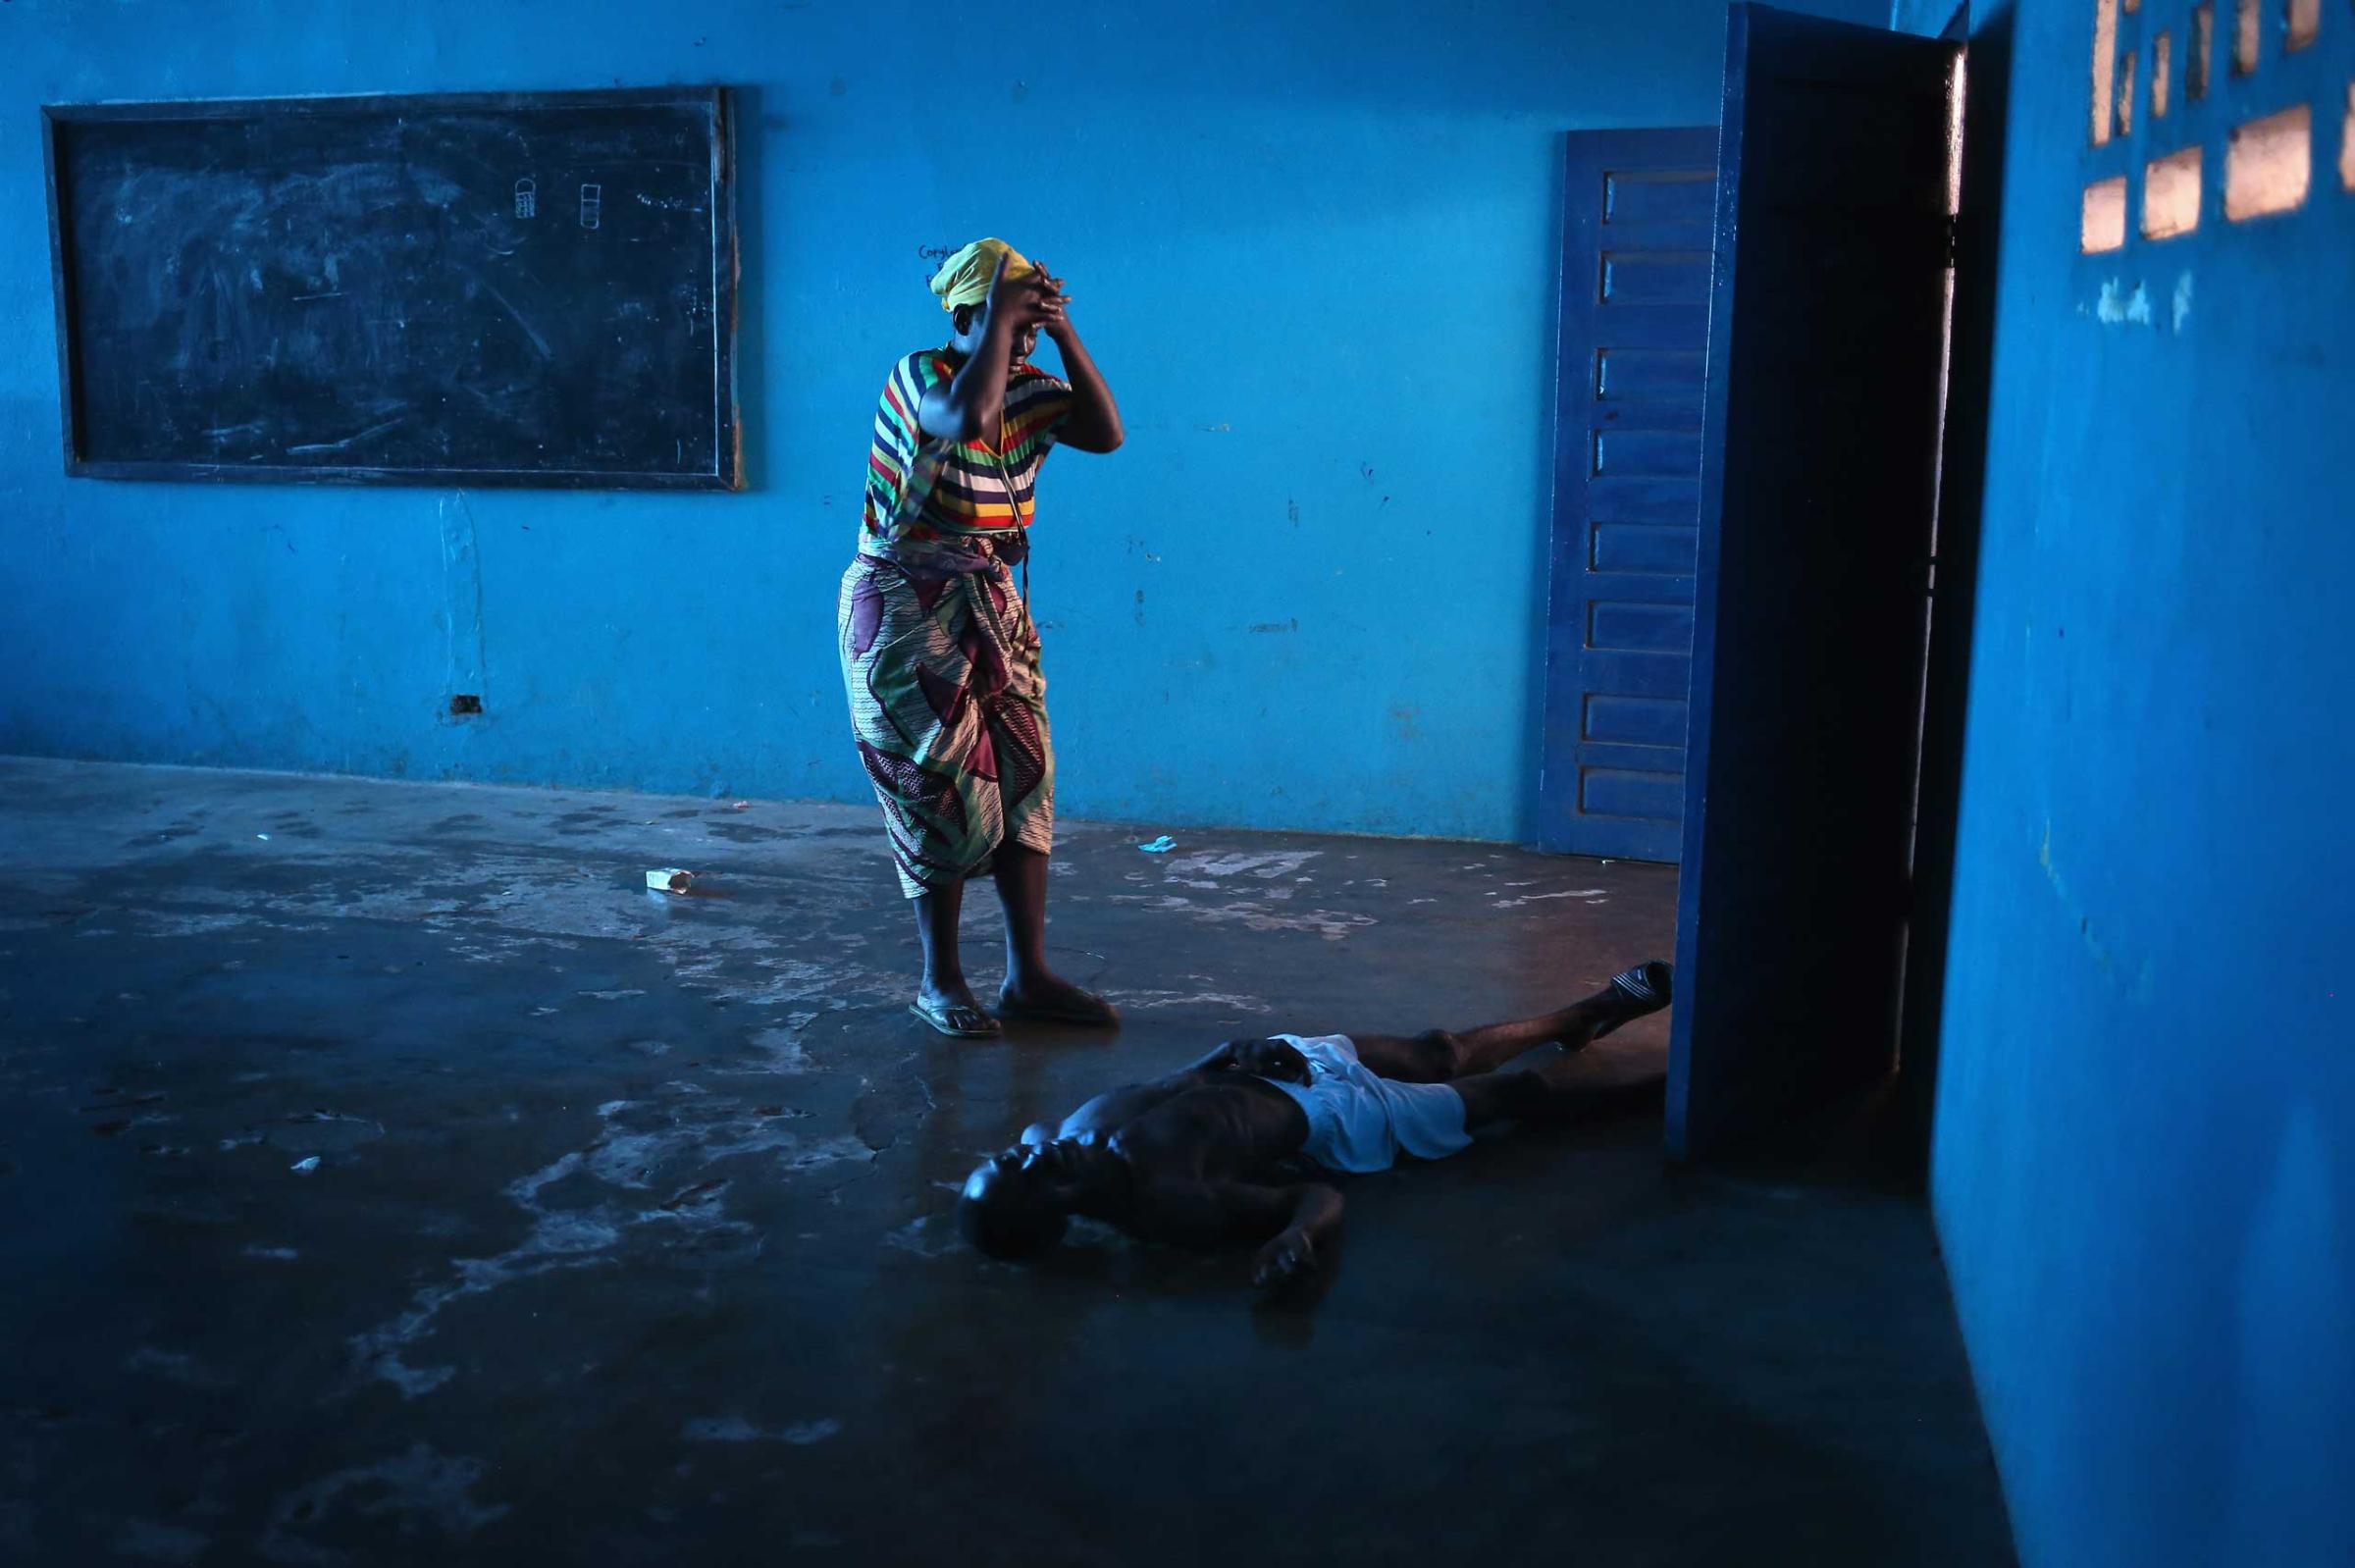 Umu Fambulle stands over her husband Ibrahim after he staggered and fell, knocking him unconscious in an Ebola ward on Aug. 15, 2014 in Monrovia, Liberia.